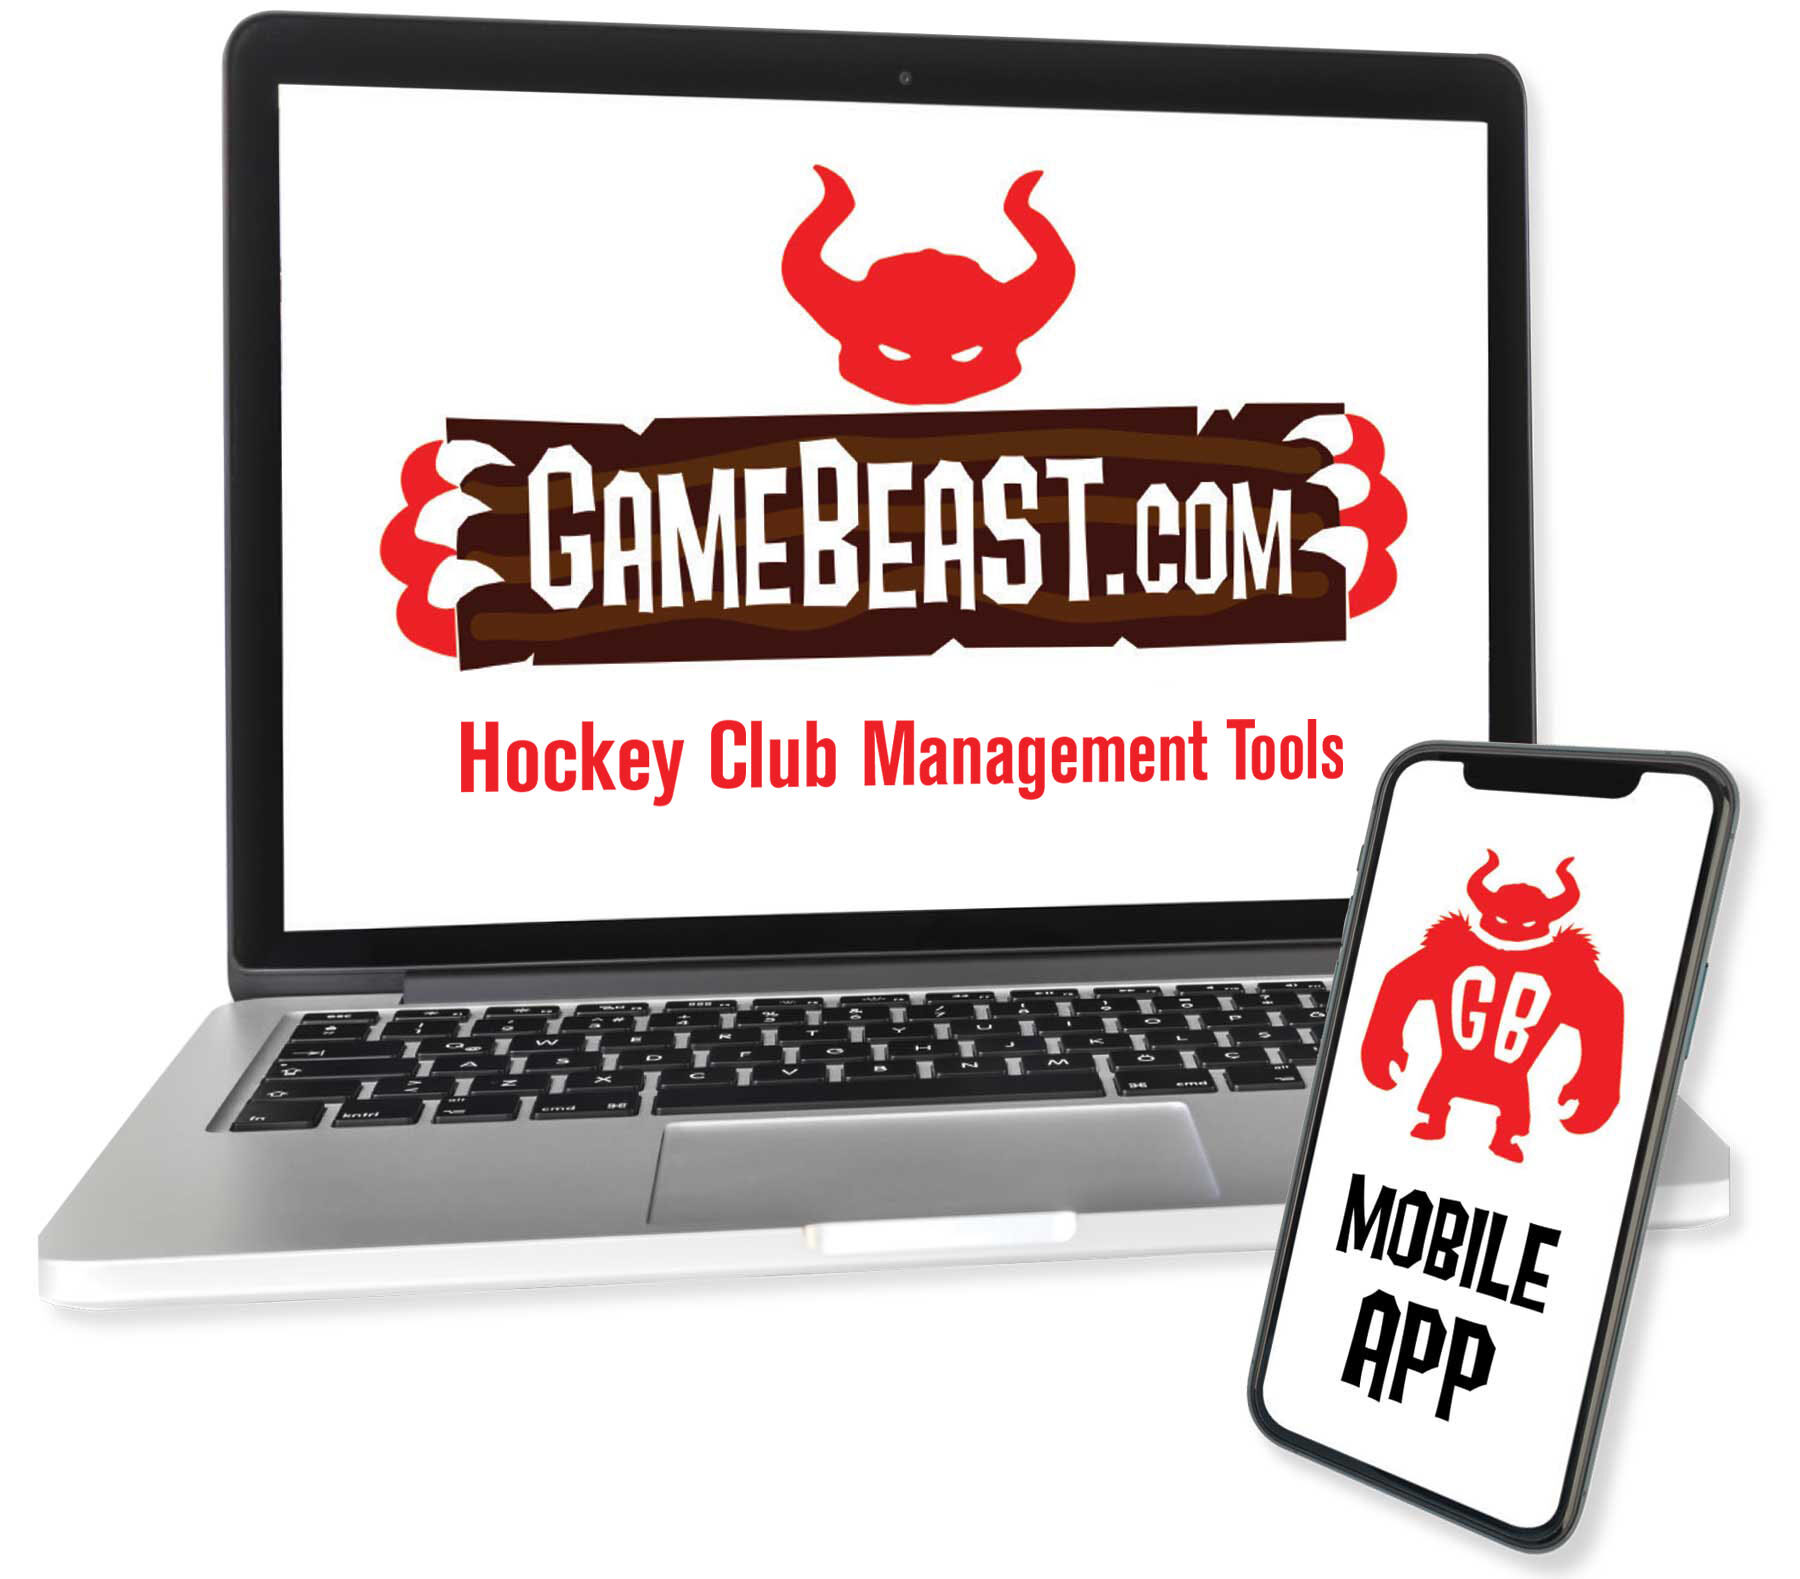 Ice Hockey Club management Tools, Free to the club from GameBeast.com 